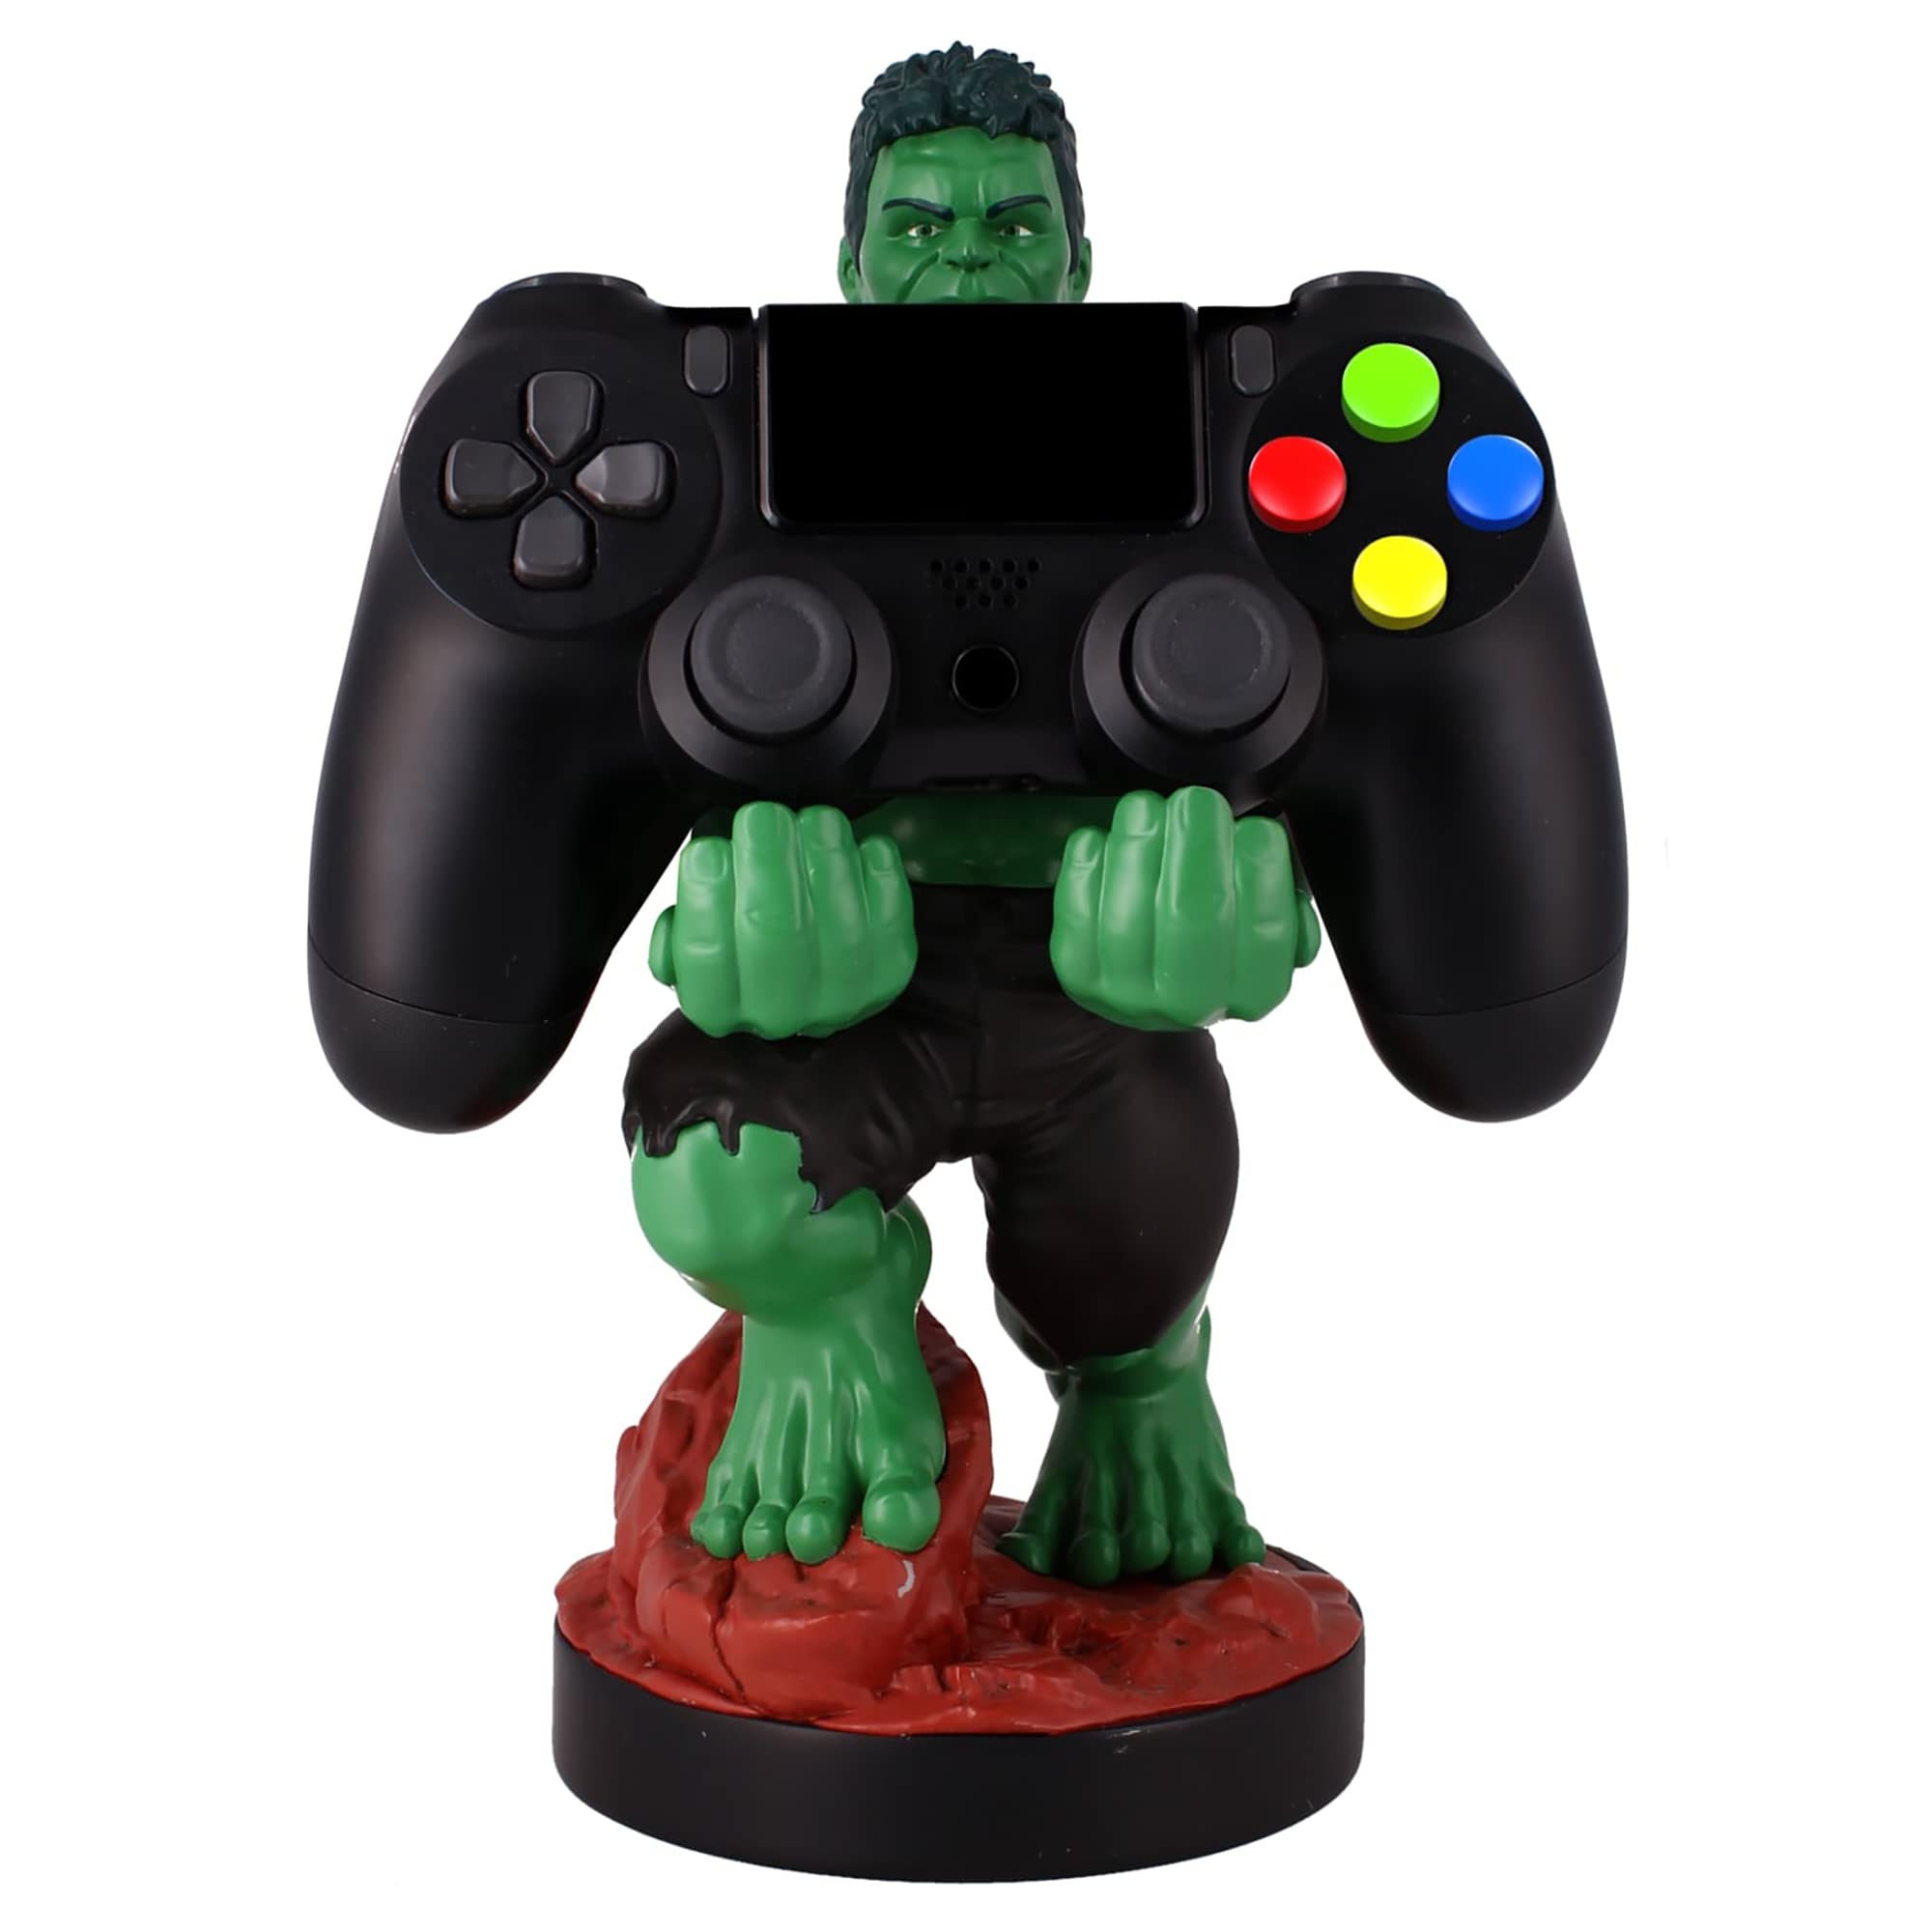 Exquisite Gaming Cable Guys: Marvel Avengers Hulk Phone Stand & Controller Holder - Officially Licenced Figure